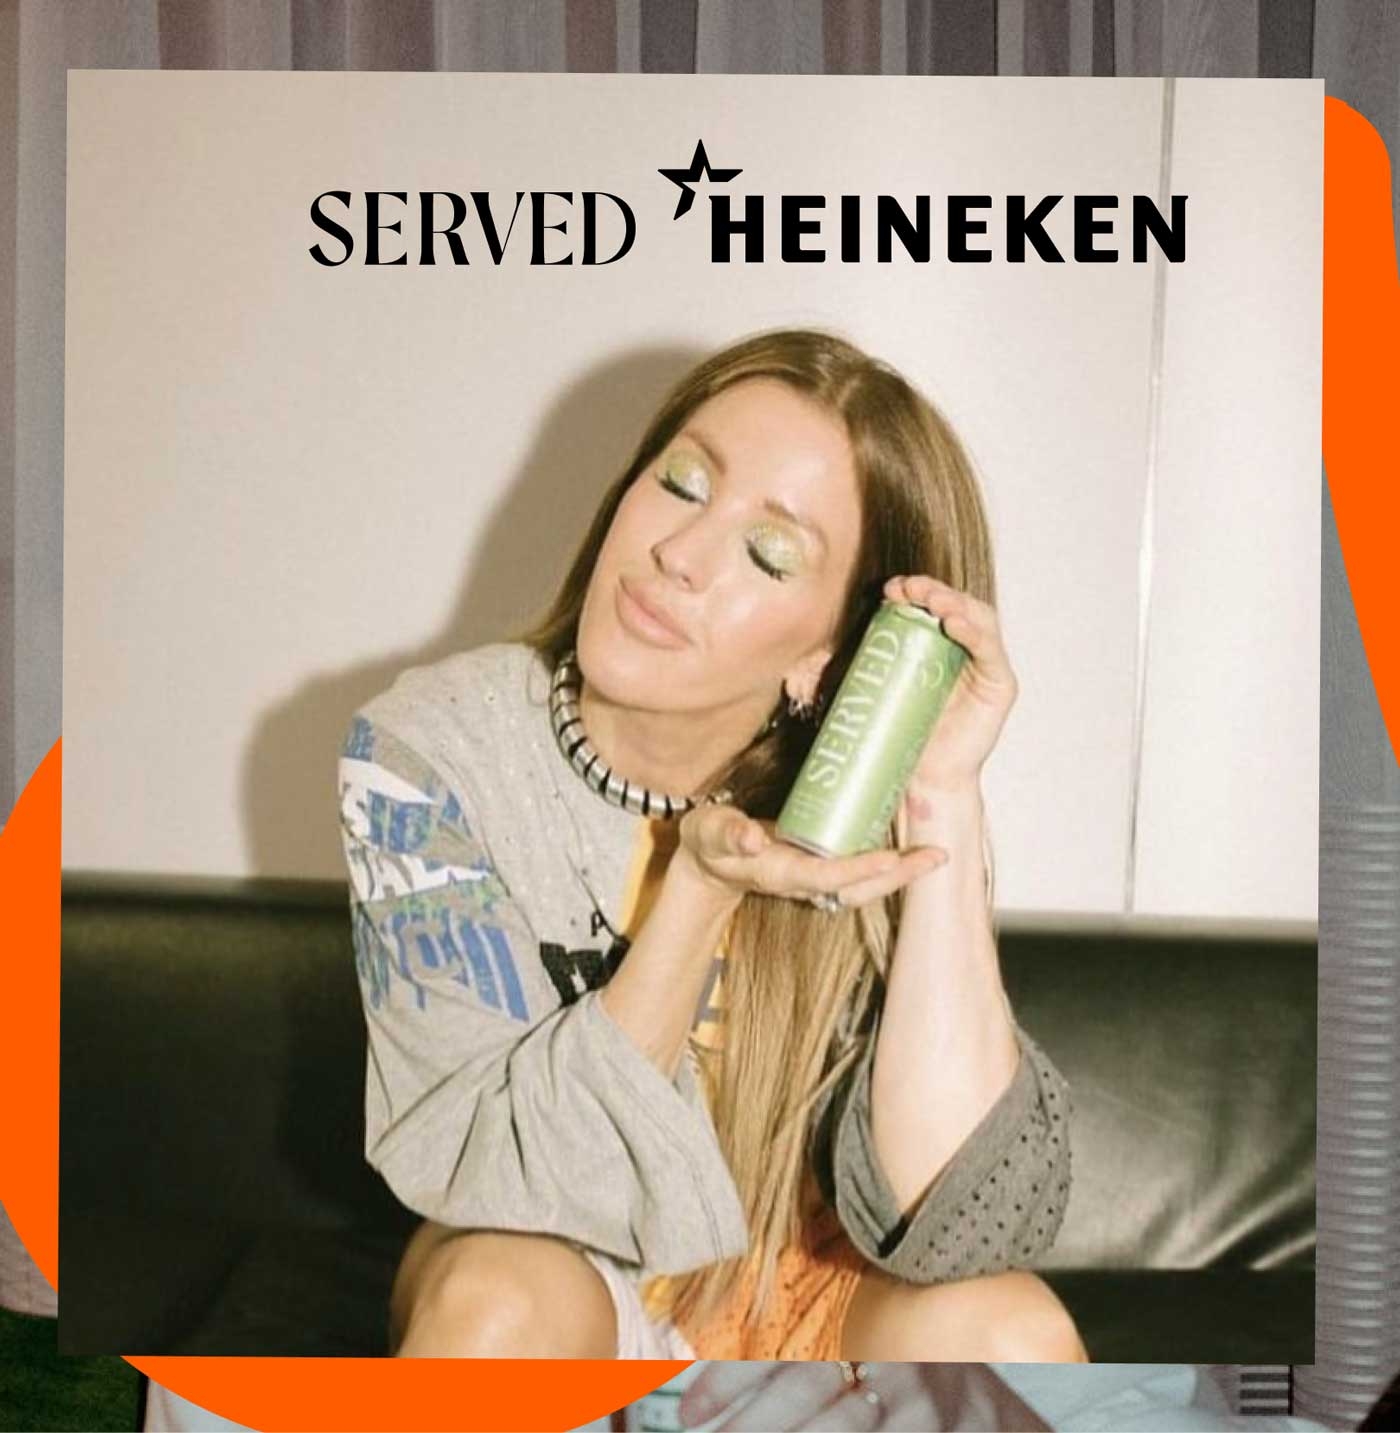 Heineken Acquires Significant Share in Served, Joining Forces in a Refreshing Partnership Thumbnail